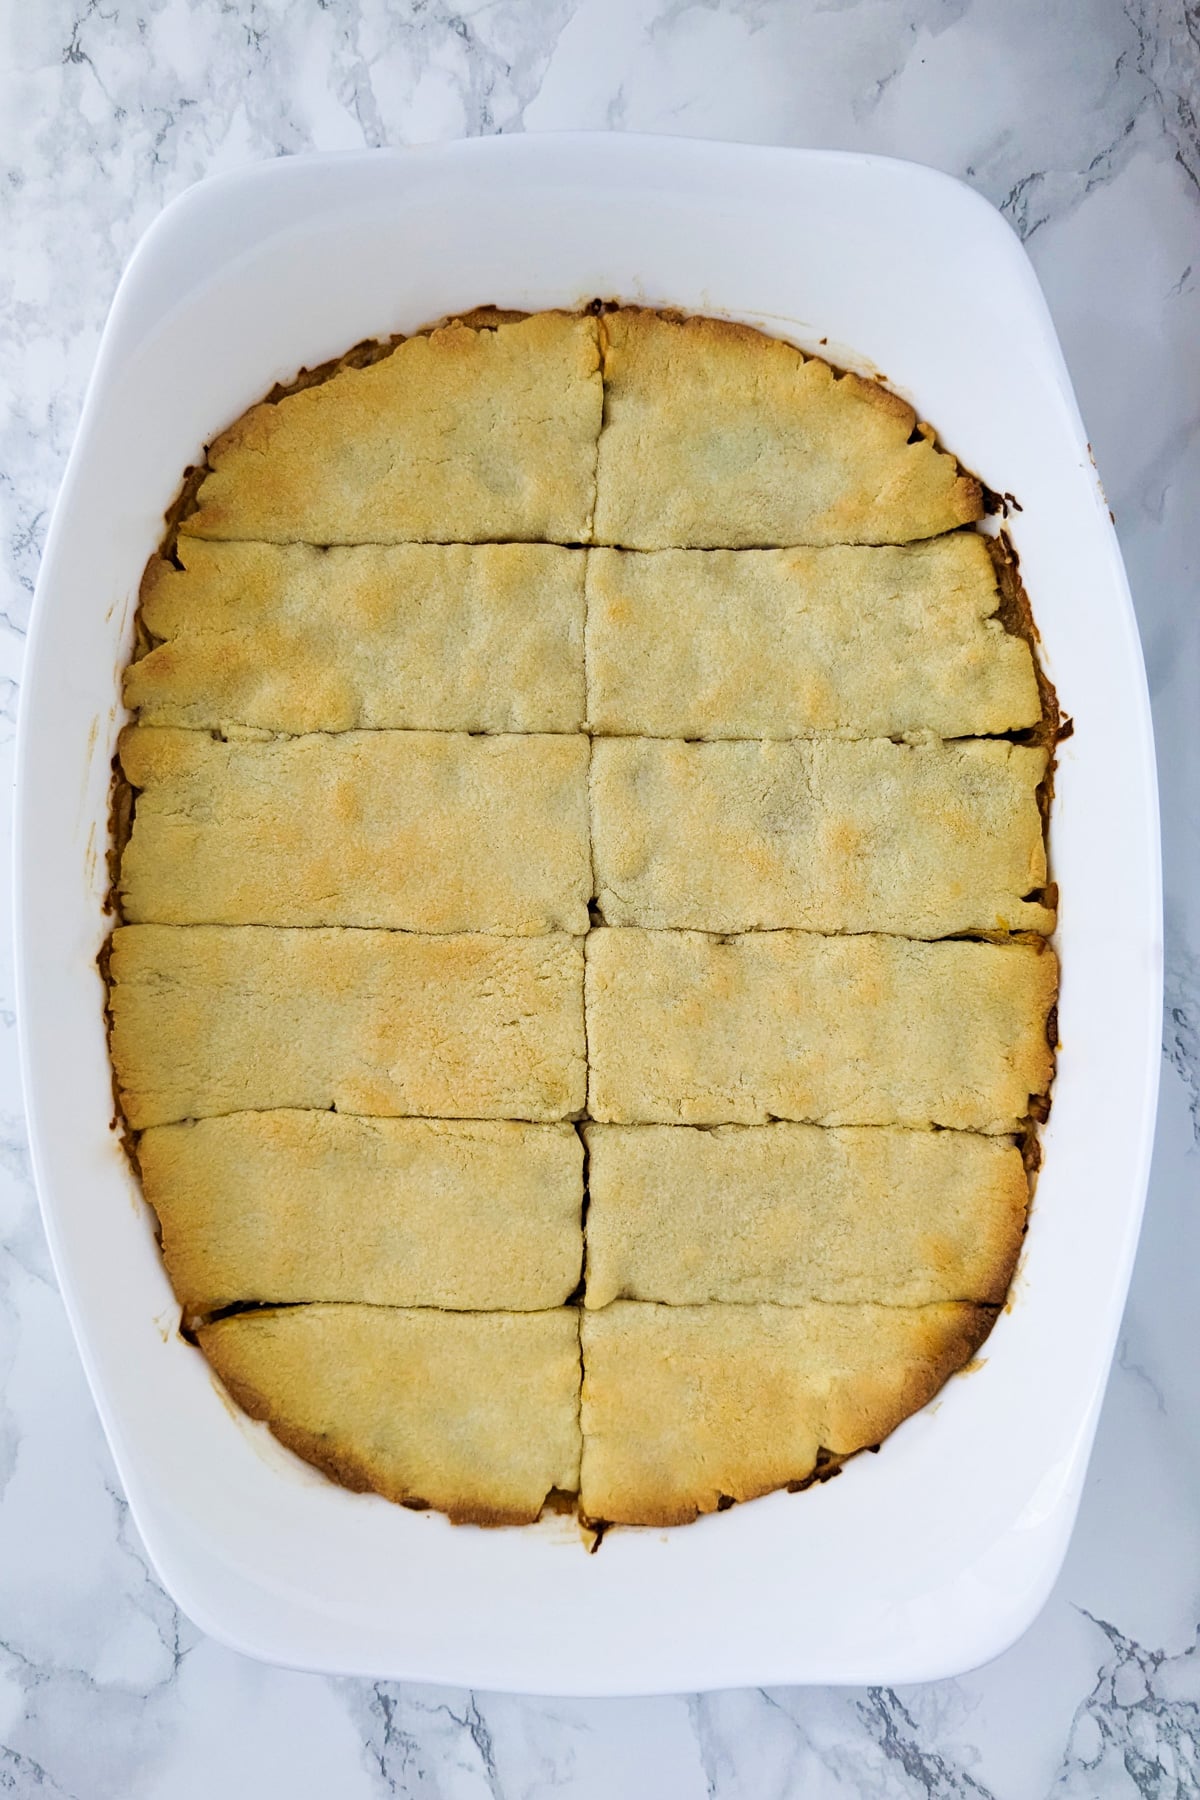 Top view of sliced apple cake in a casserole.